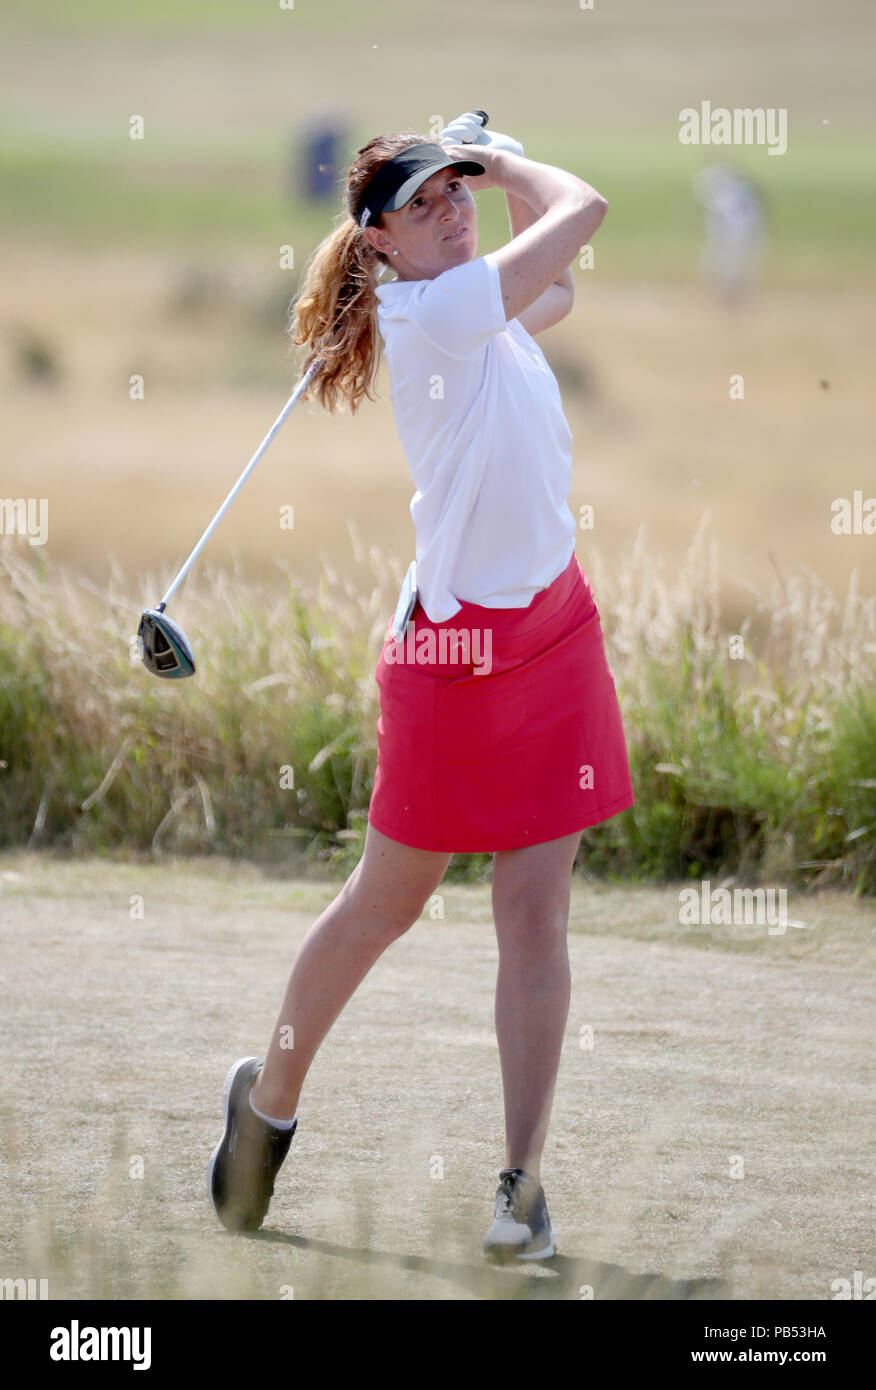 England's Florentyna Parker on the 5th tee during day one of the 2018 Aberdeen Standard Investments Ladies Scottish Open at Gullane Golf Club. PRESS ASSOCIATION Photo, Picture date: Thursday July 26, 2018. Photo credit should read: Jane Barlow/PA Wire. RESTRICTIONS: Editorial use only. No commercial use. Stock Photo